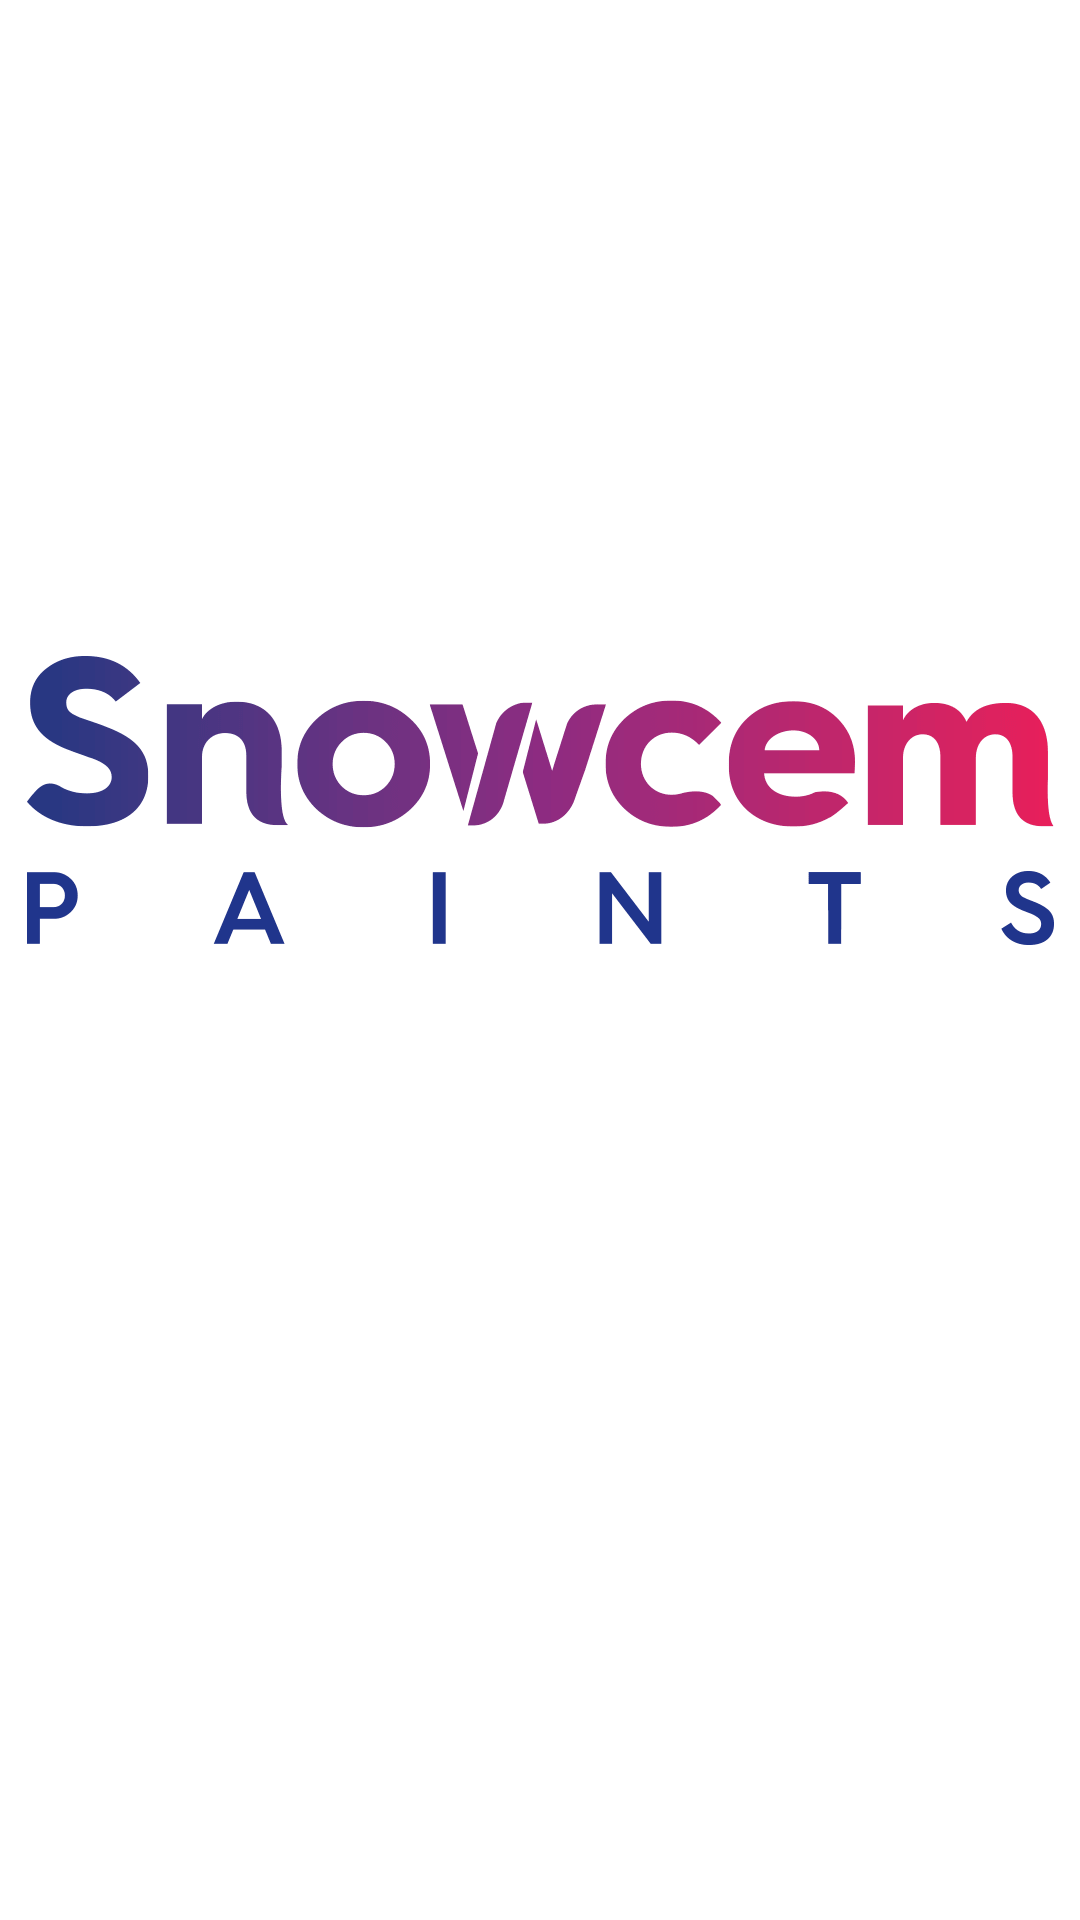 Snowcem Home Painting Services Home Painting Solutions